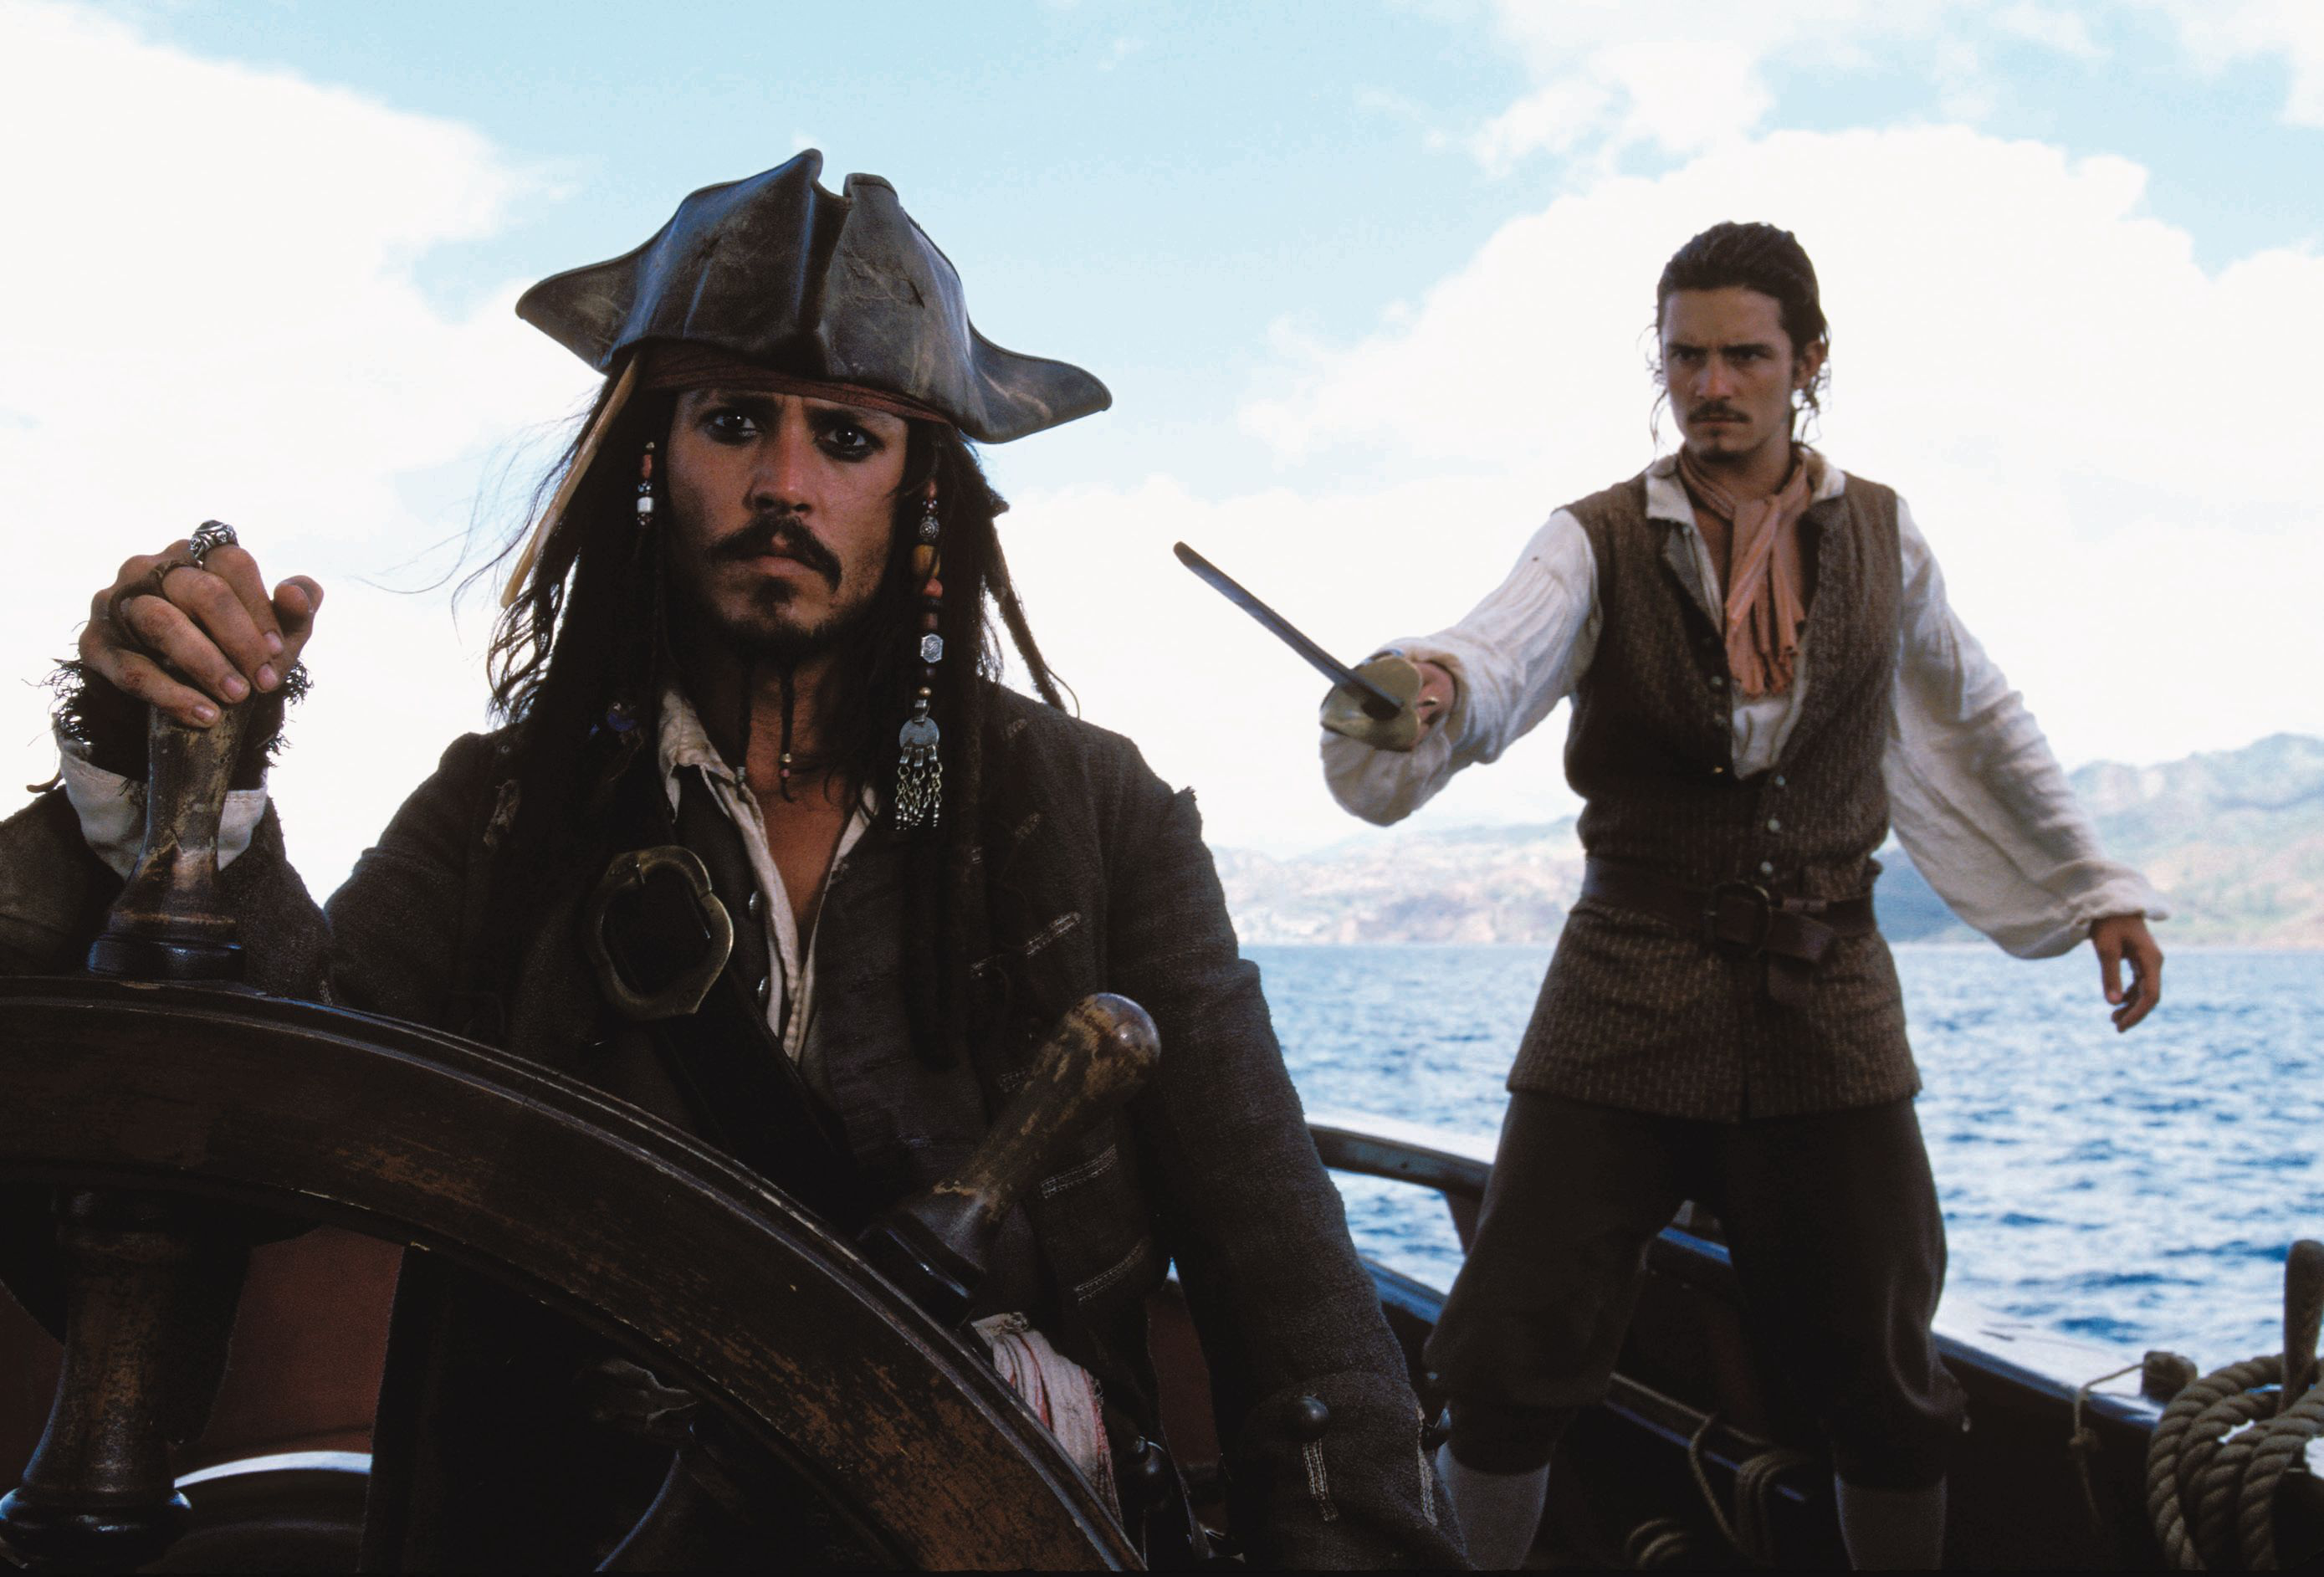 pirates of the caribbean: the curse of the black pearl, pirates of the caribbean, movie, jack sparrow, johnny depp, orlando bloom, will turner lock screen backgrounds